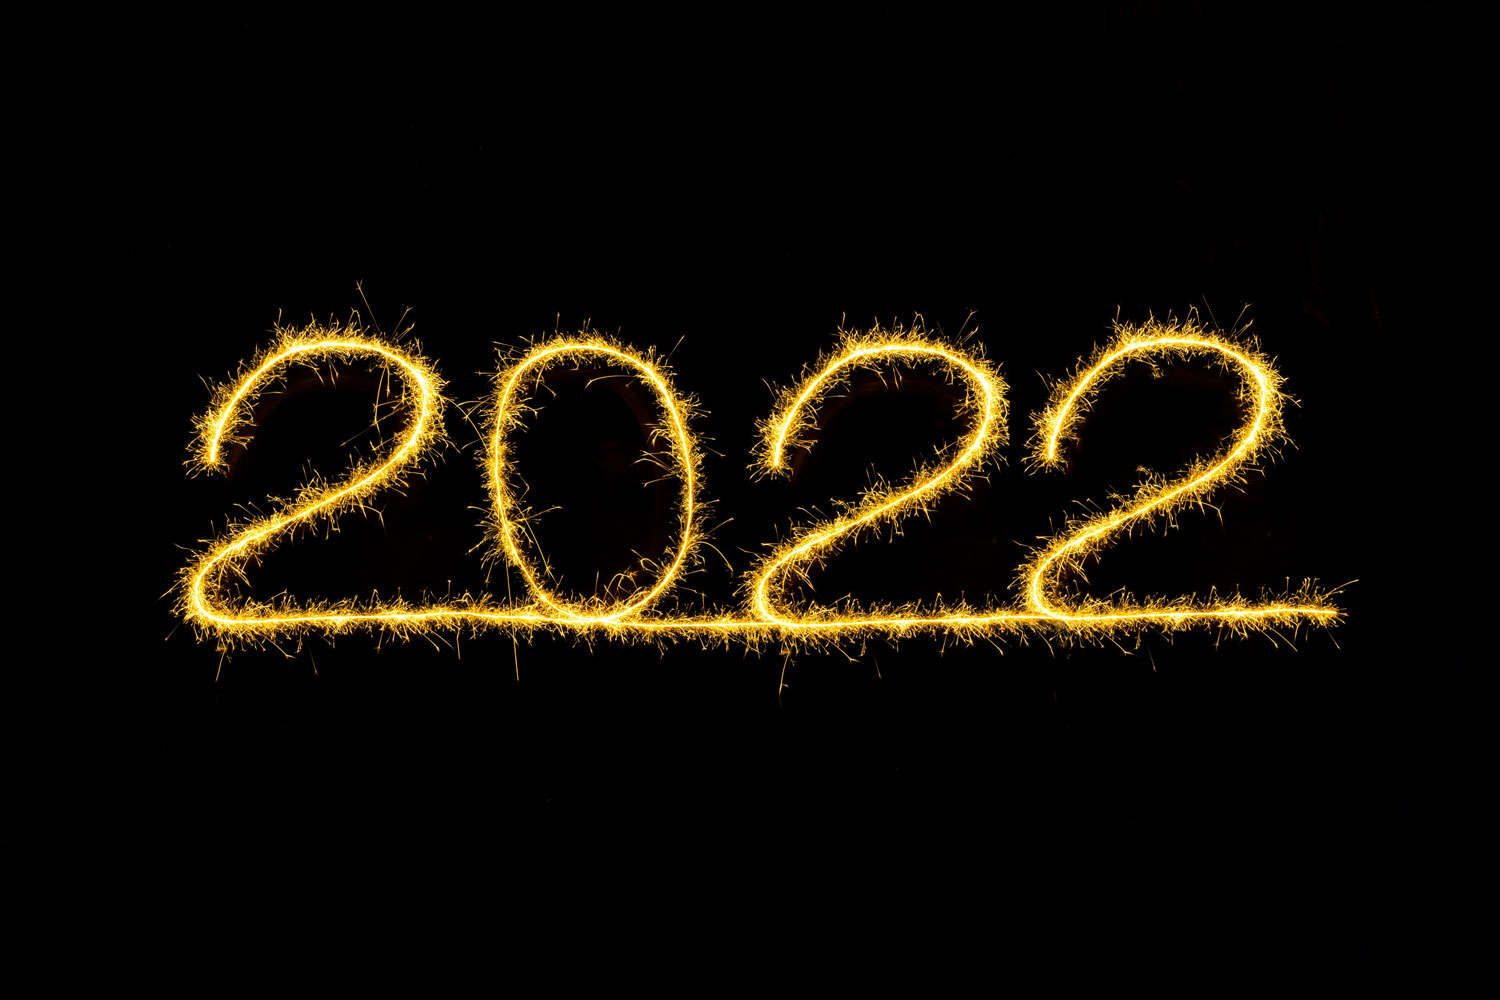 What is New in Plumbing for 2022?